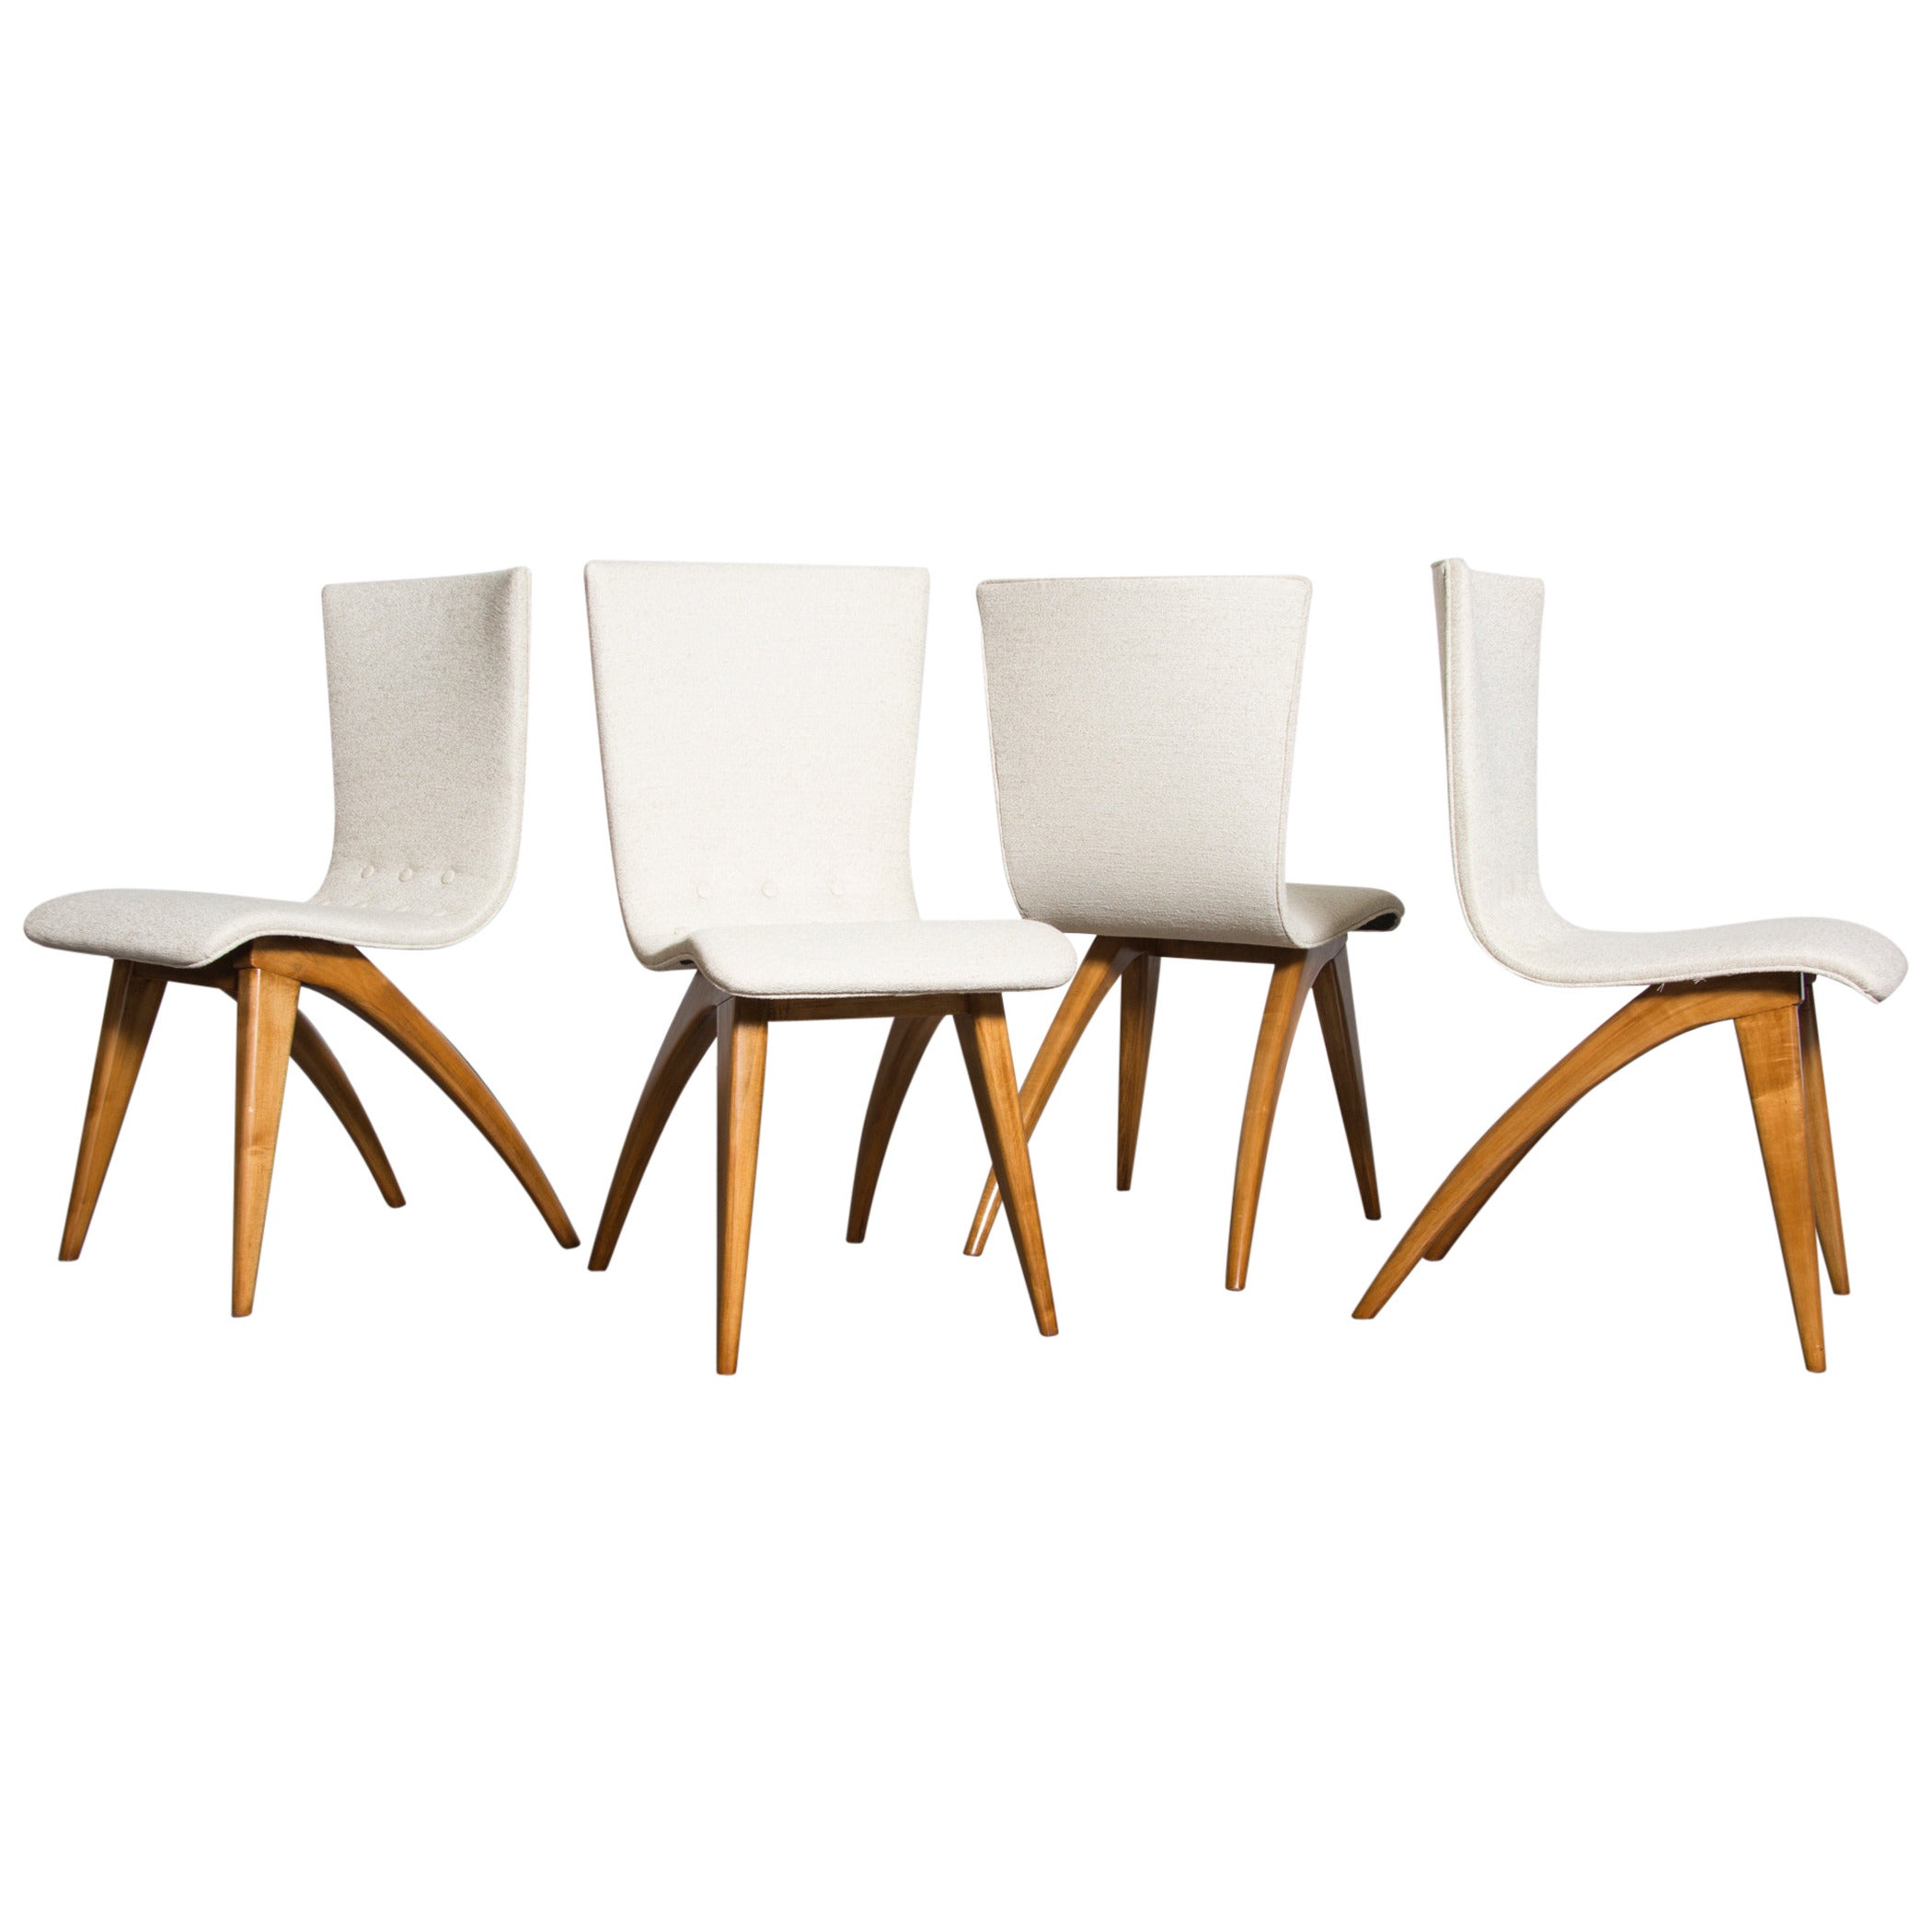 Set of Four Van Os Curved Birch Dining Chairs